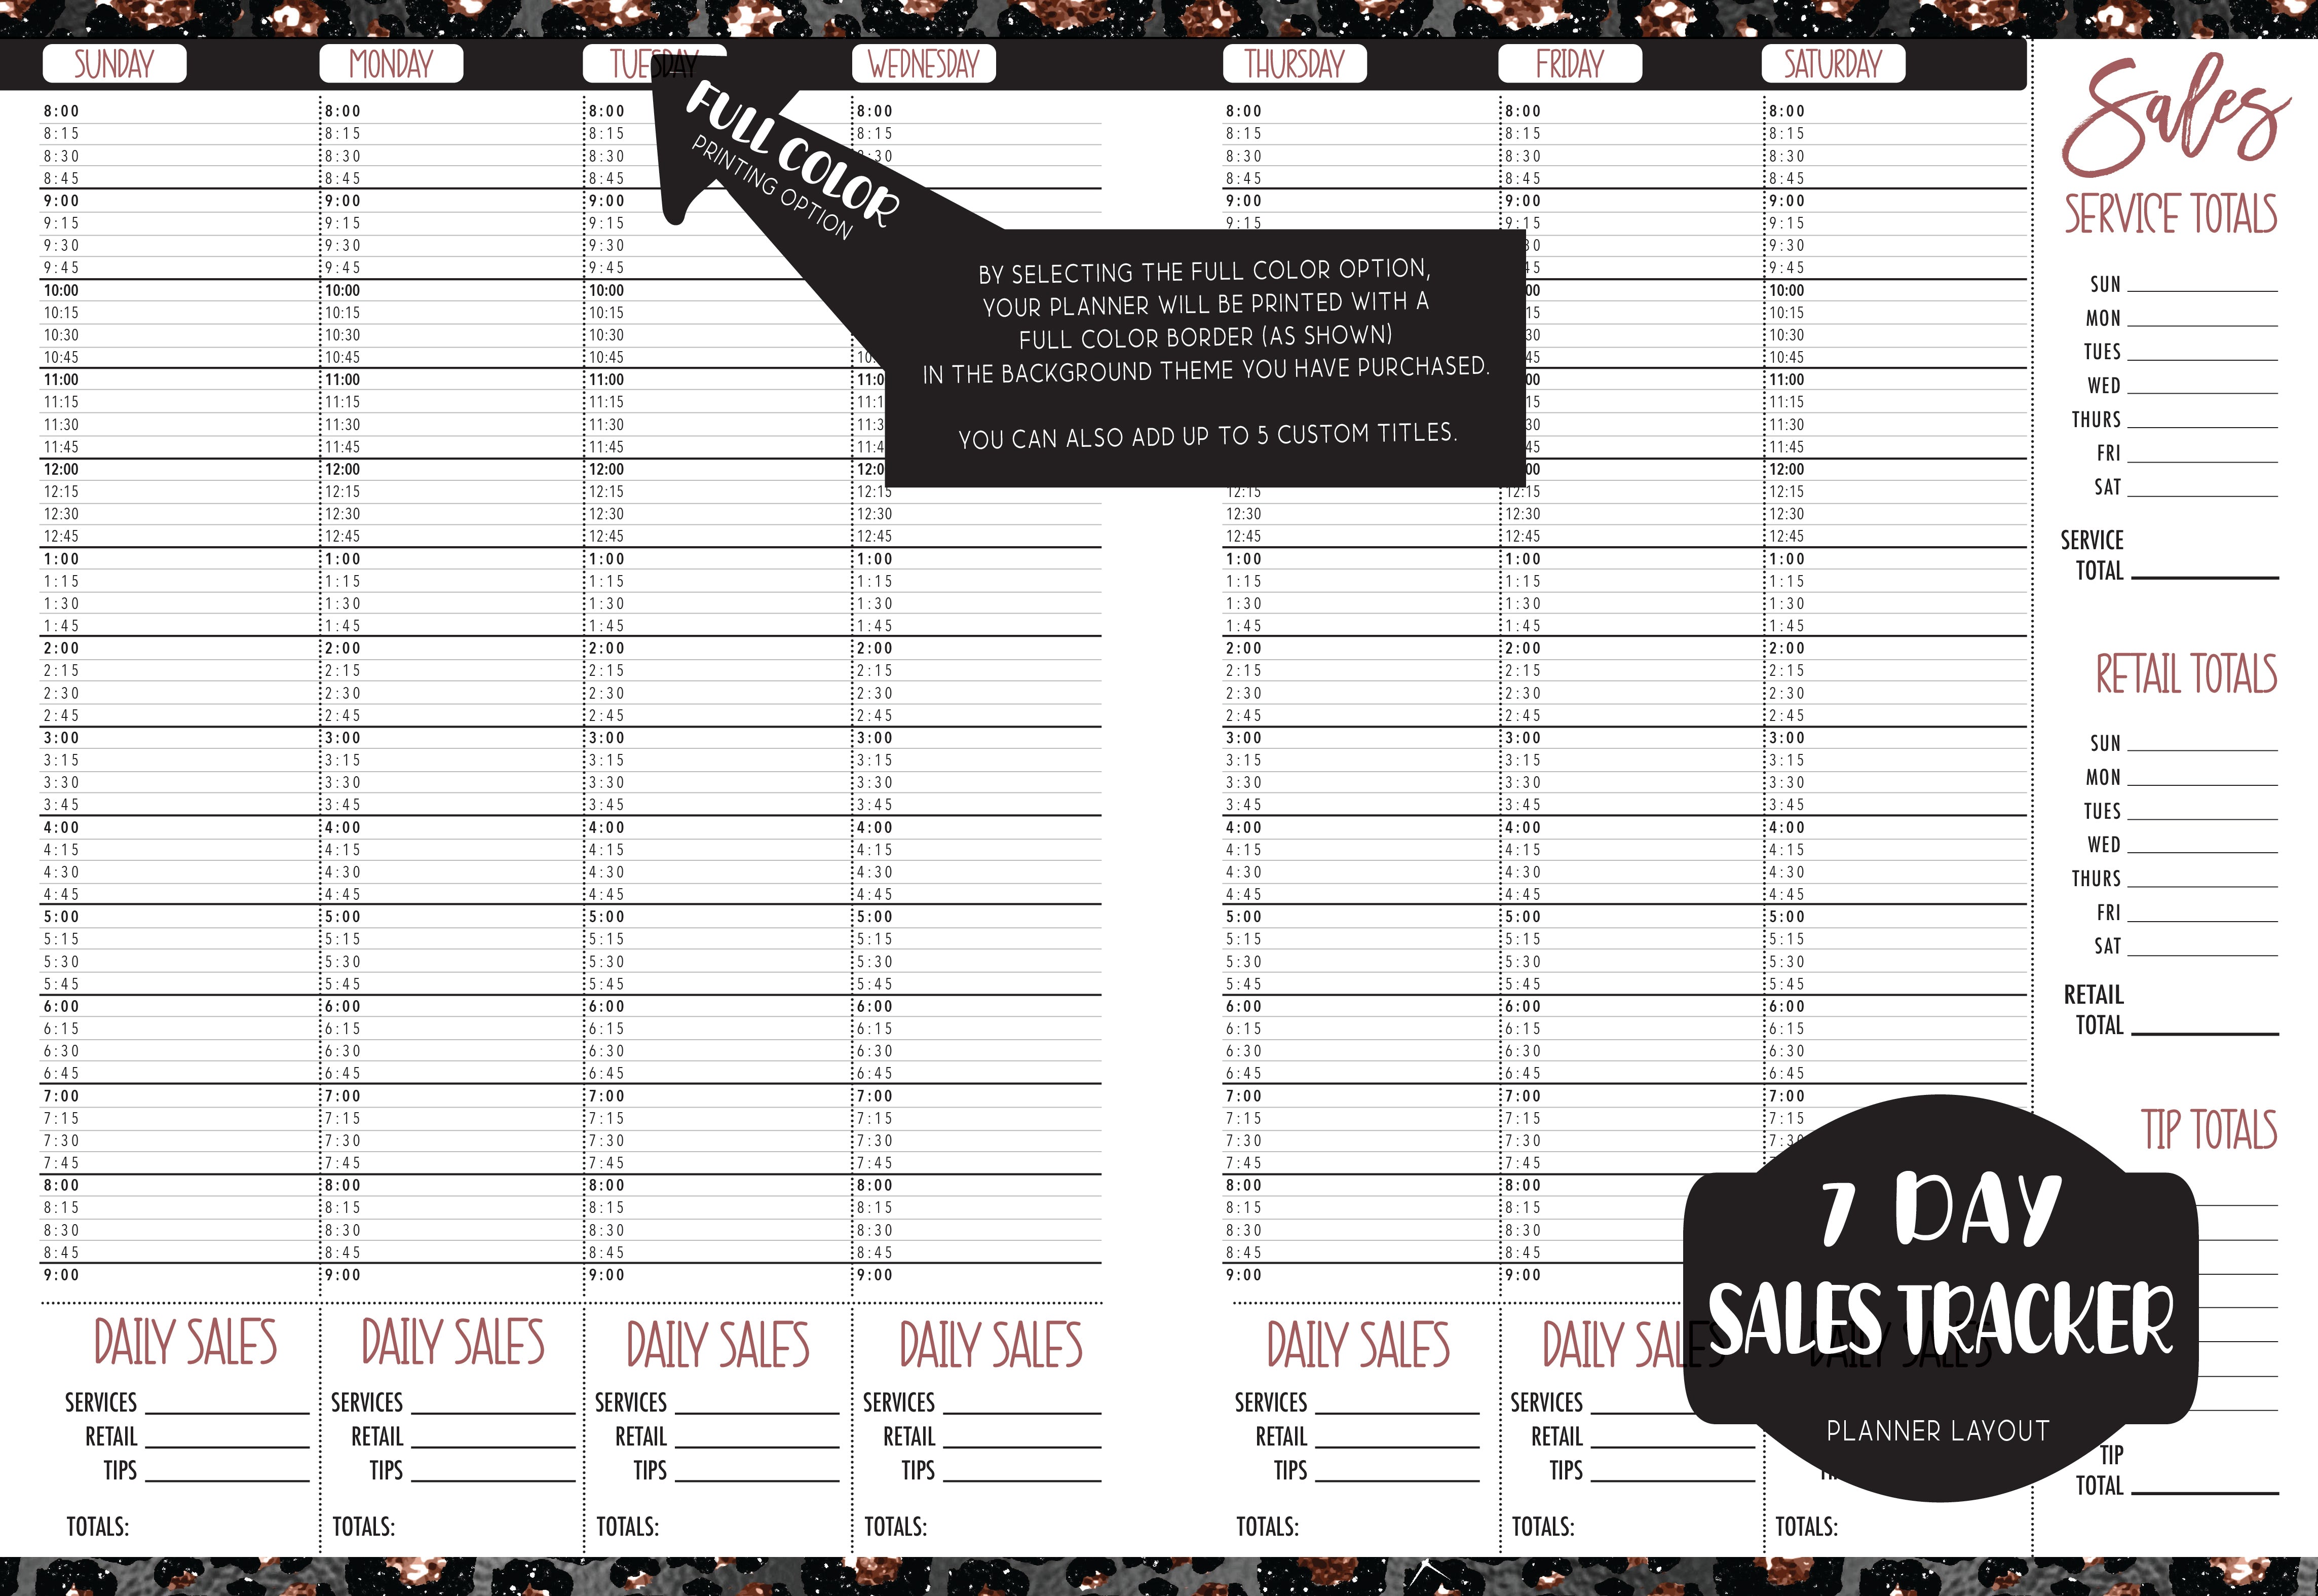 Sales Tracker Appointment Book - BLACK COWHIDE